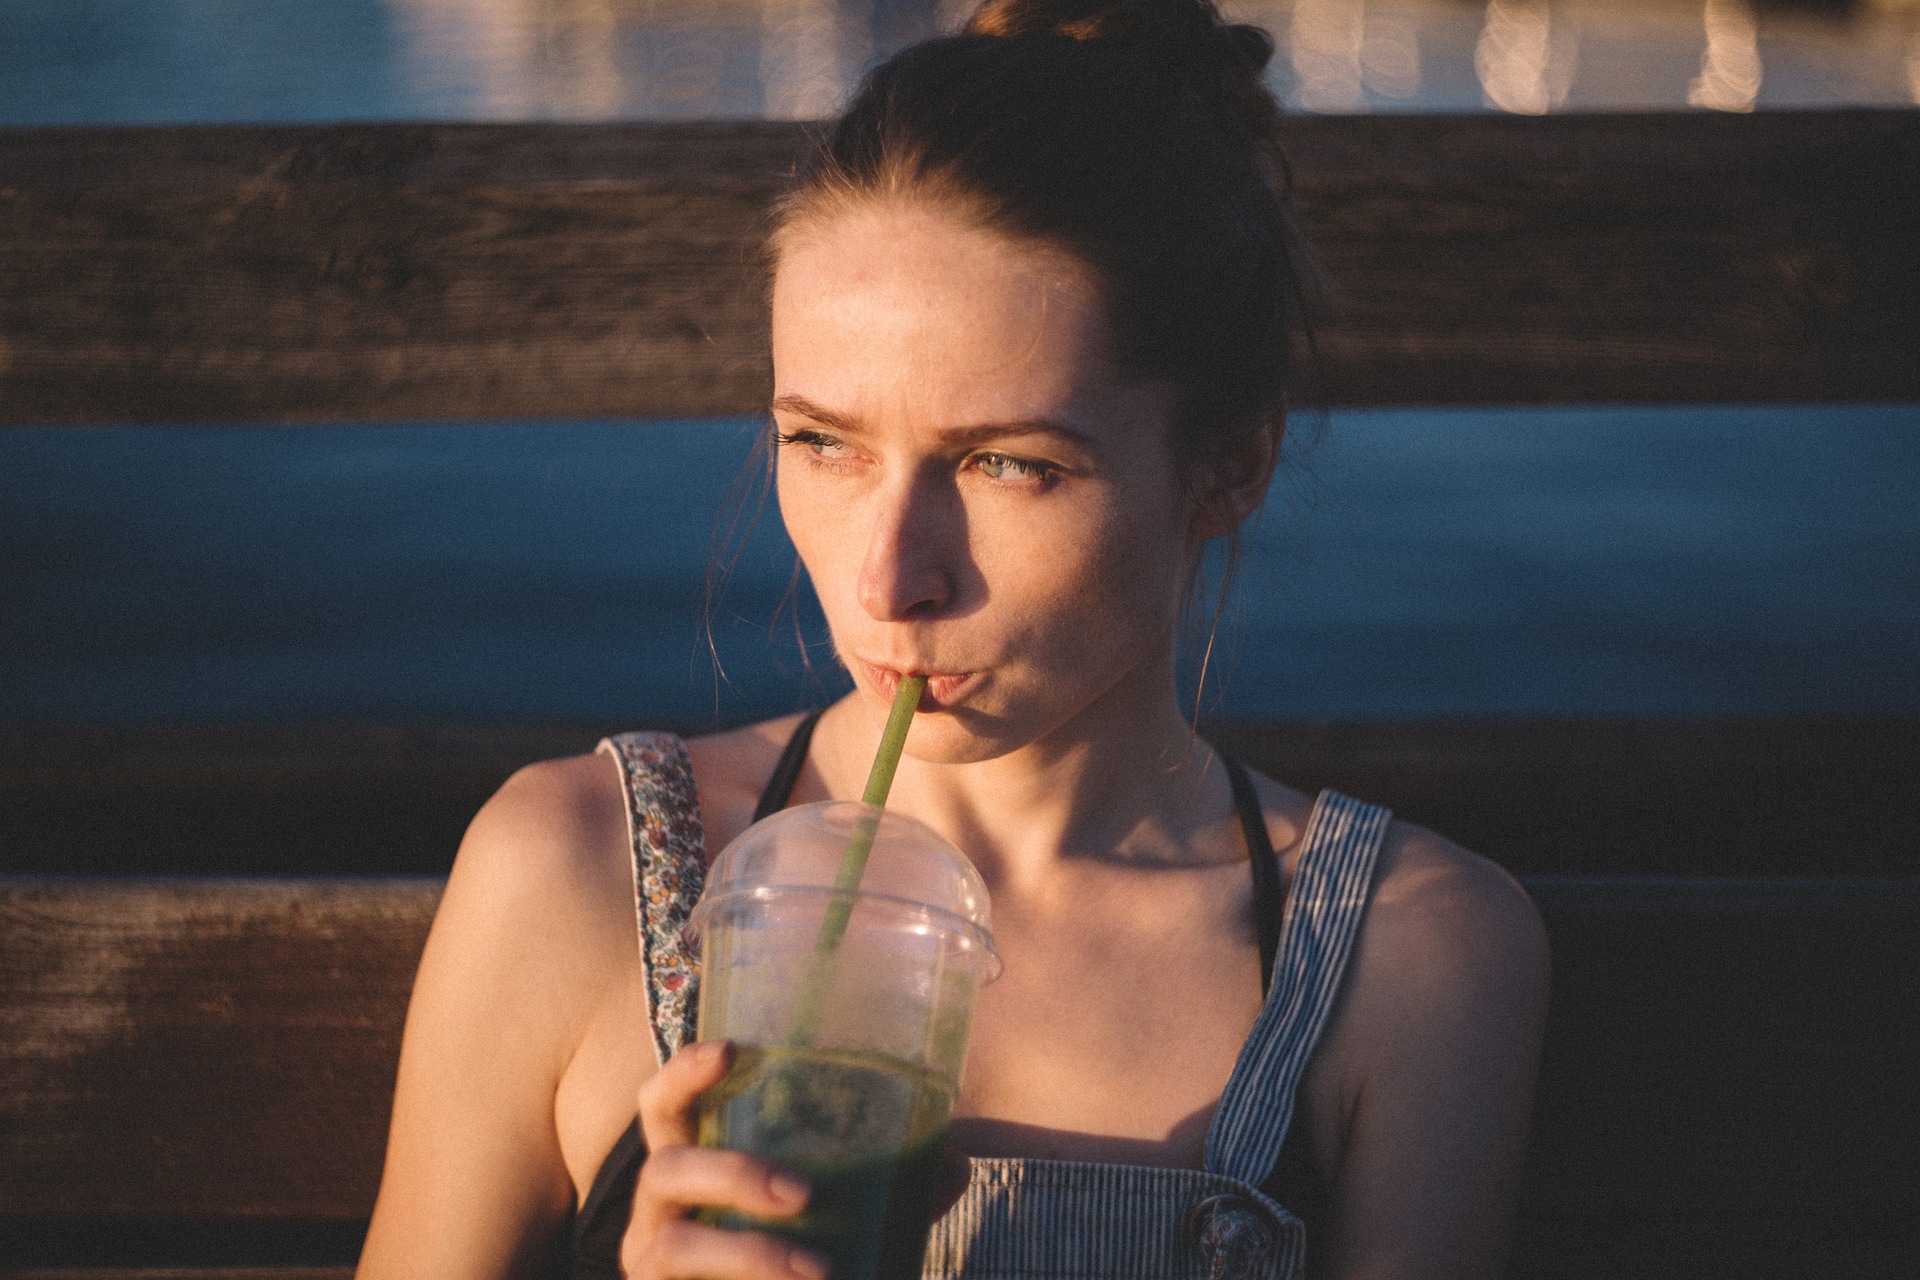 lady drinking a green drink